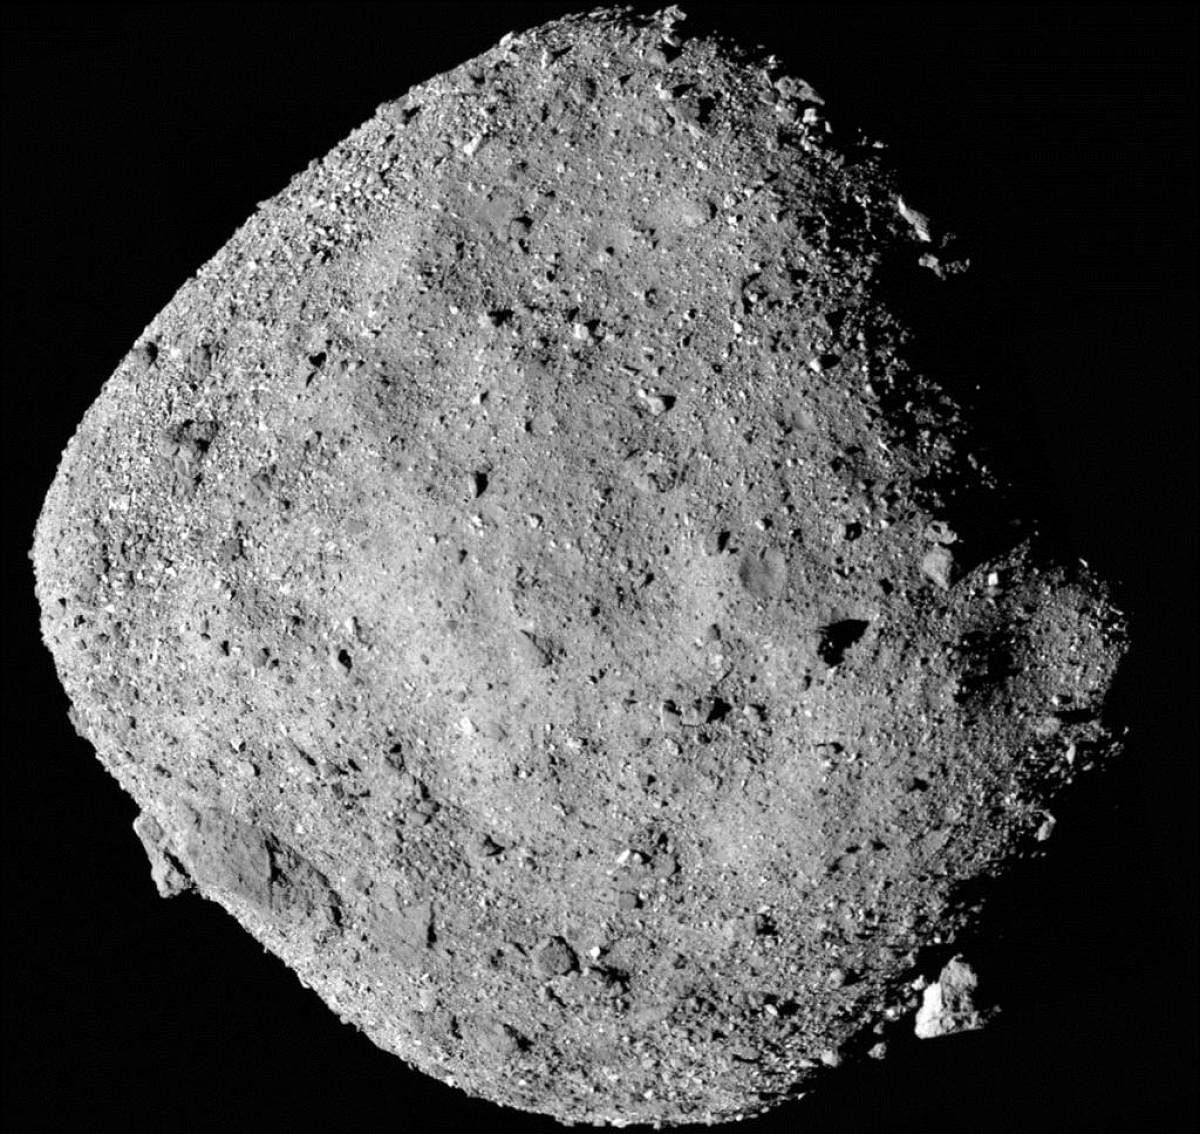 Evidence of water discovered on asteroid Bennu: NASA